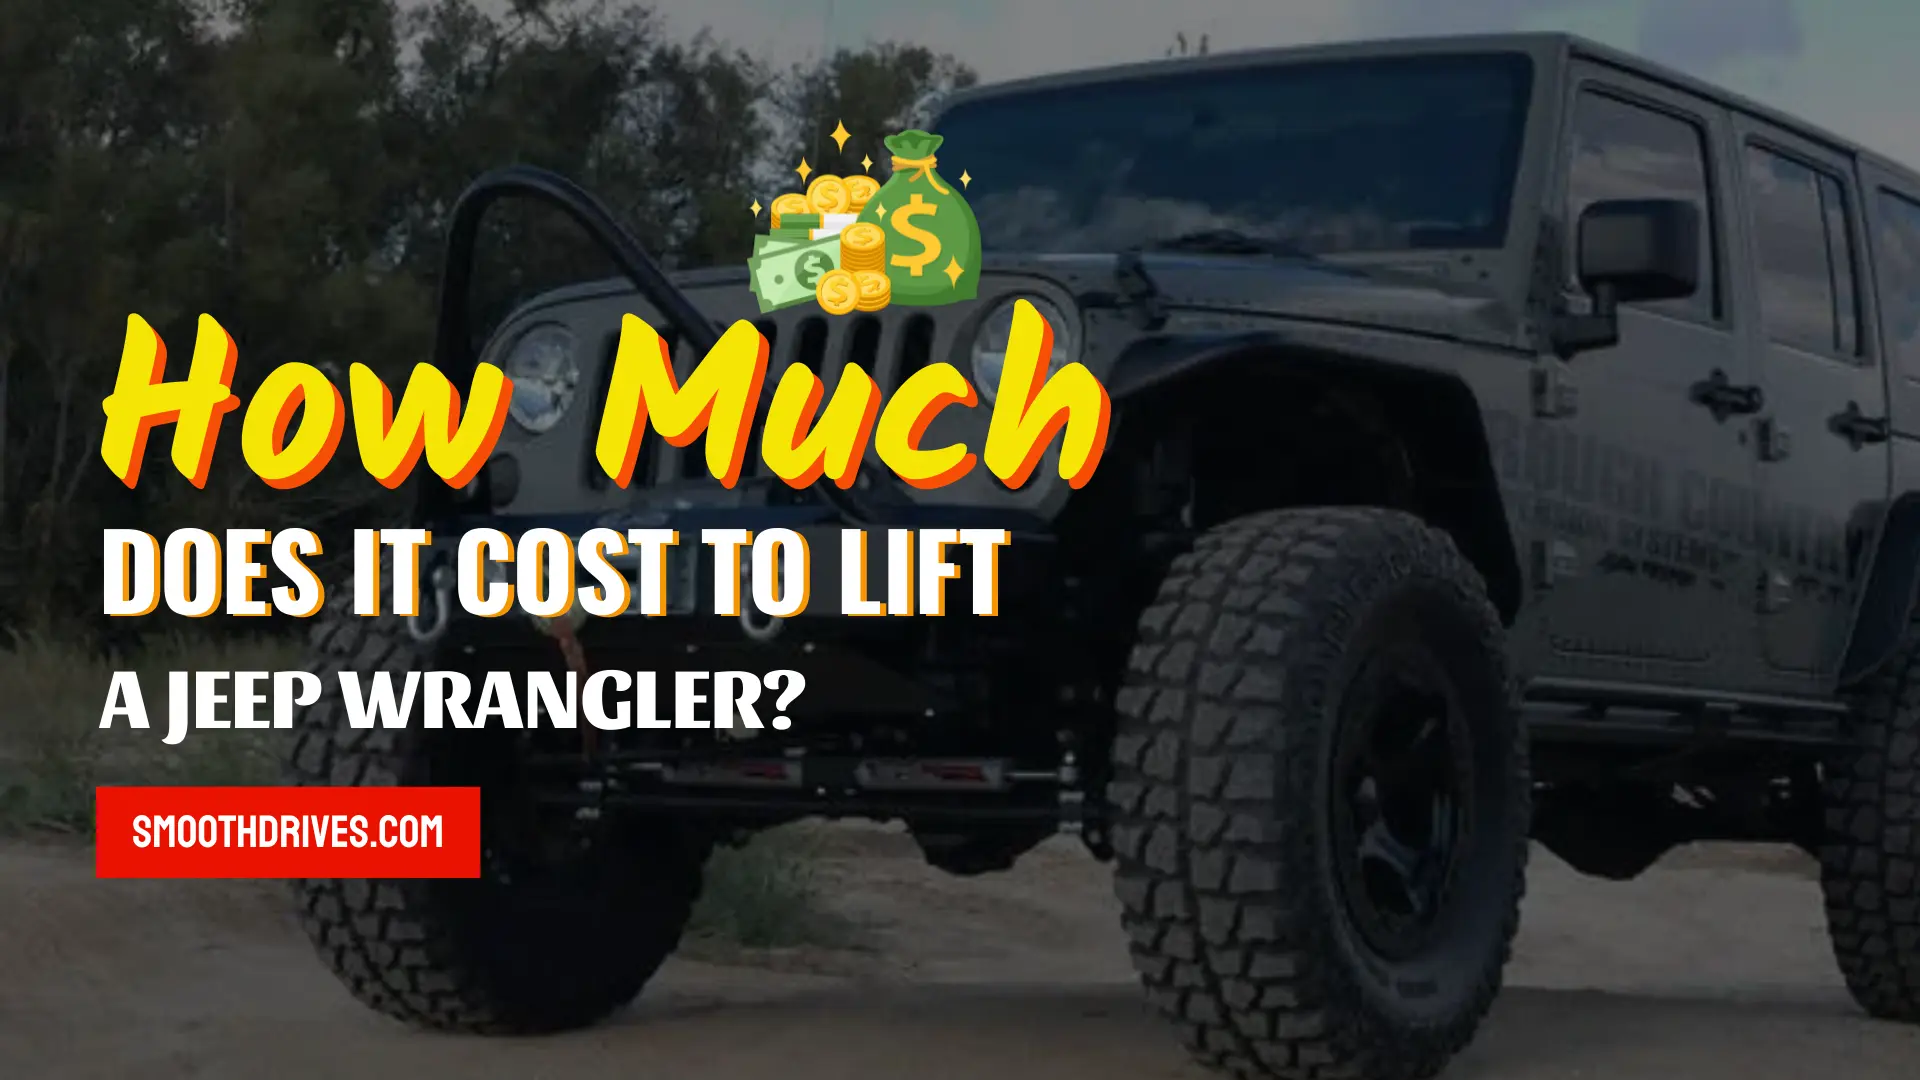 How Much Does It Cost To Lift A Jeep Wrangler